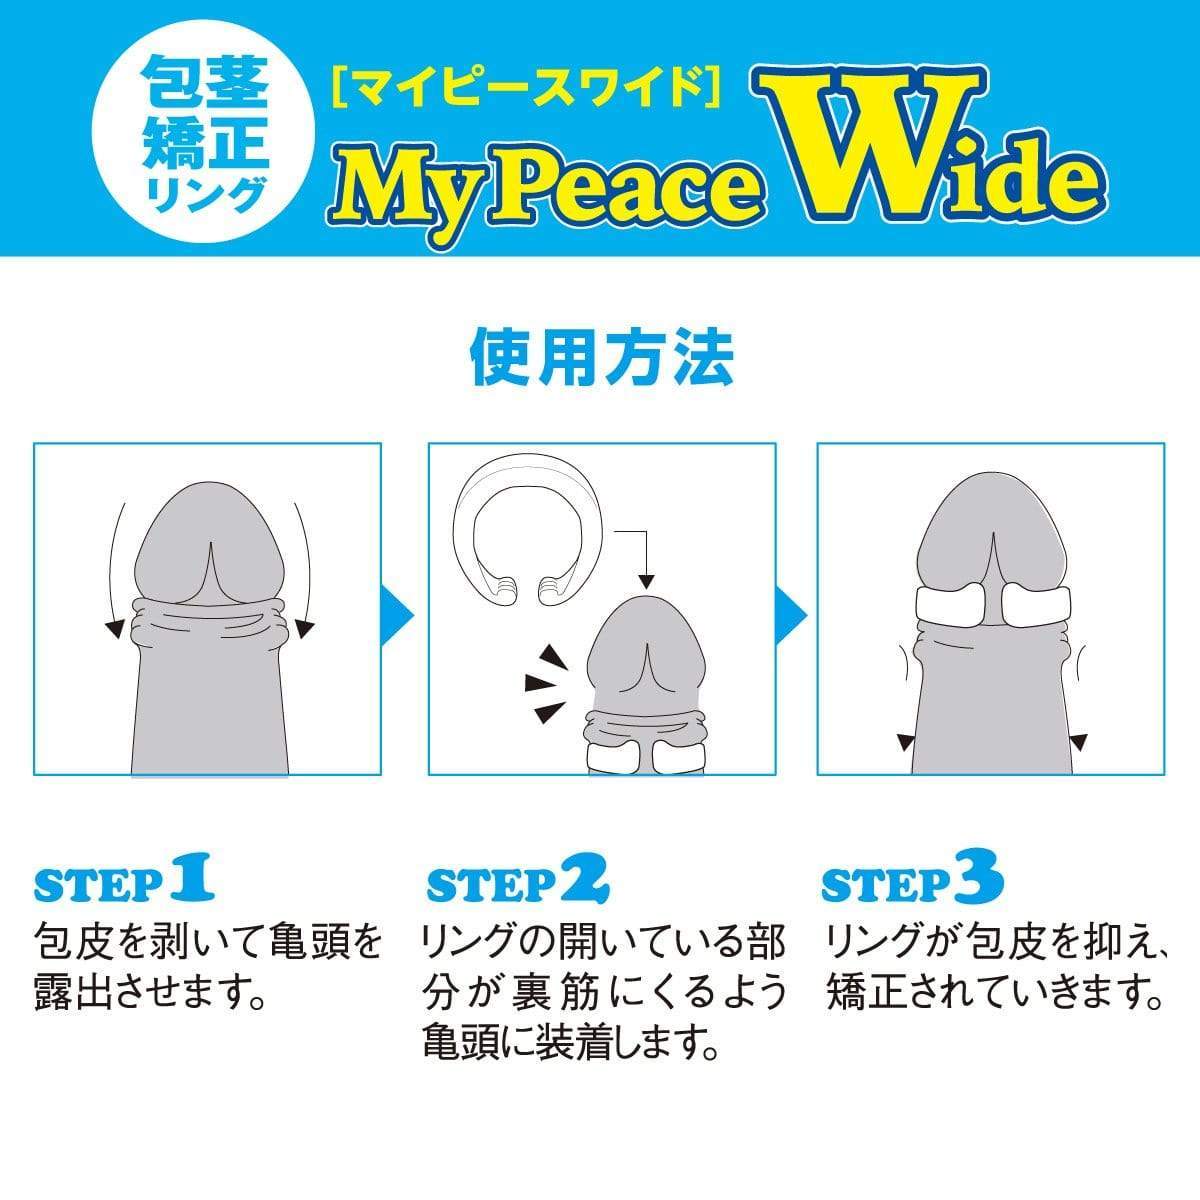 SSI Japan - My Peace Wide Standard Day Size S Correction Cock Ring (Clear) -  Cock Ring (Non Vibration)  Durio.sg